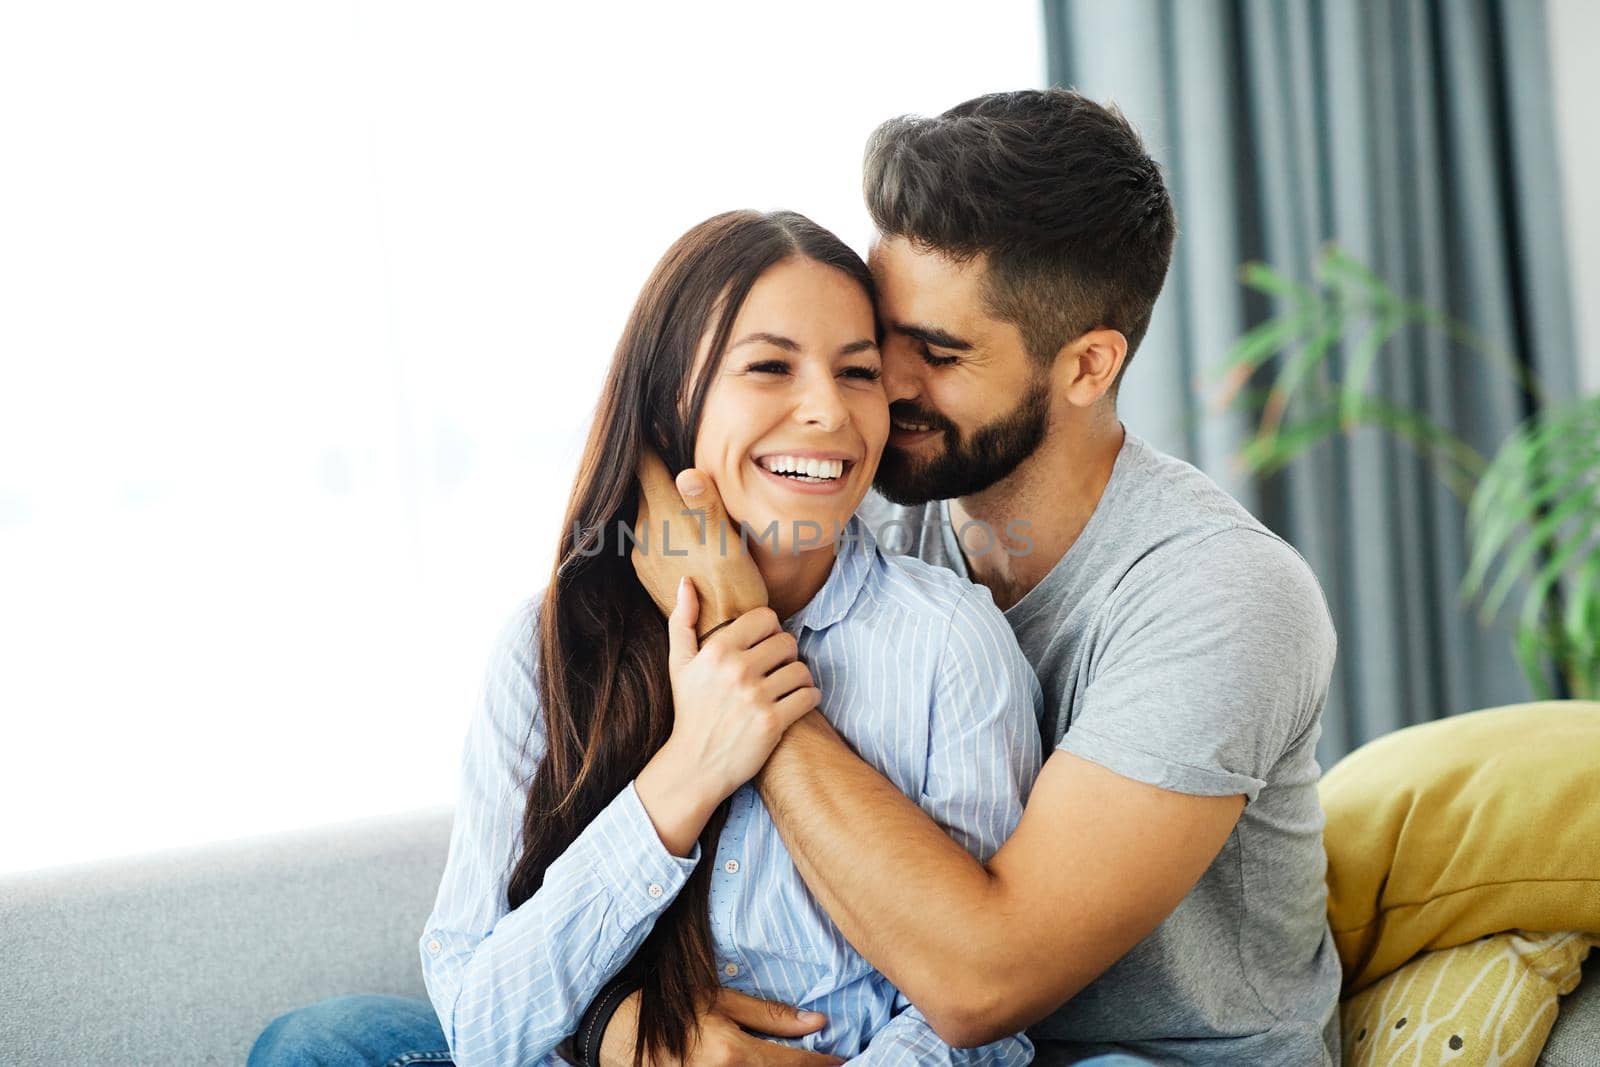 woman couple man happy happiness love young lifestyle together romantic girlfrien boyfriend by Picsfive